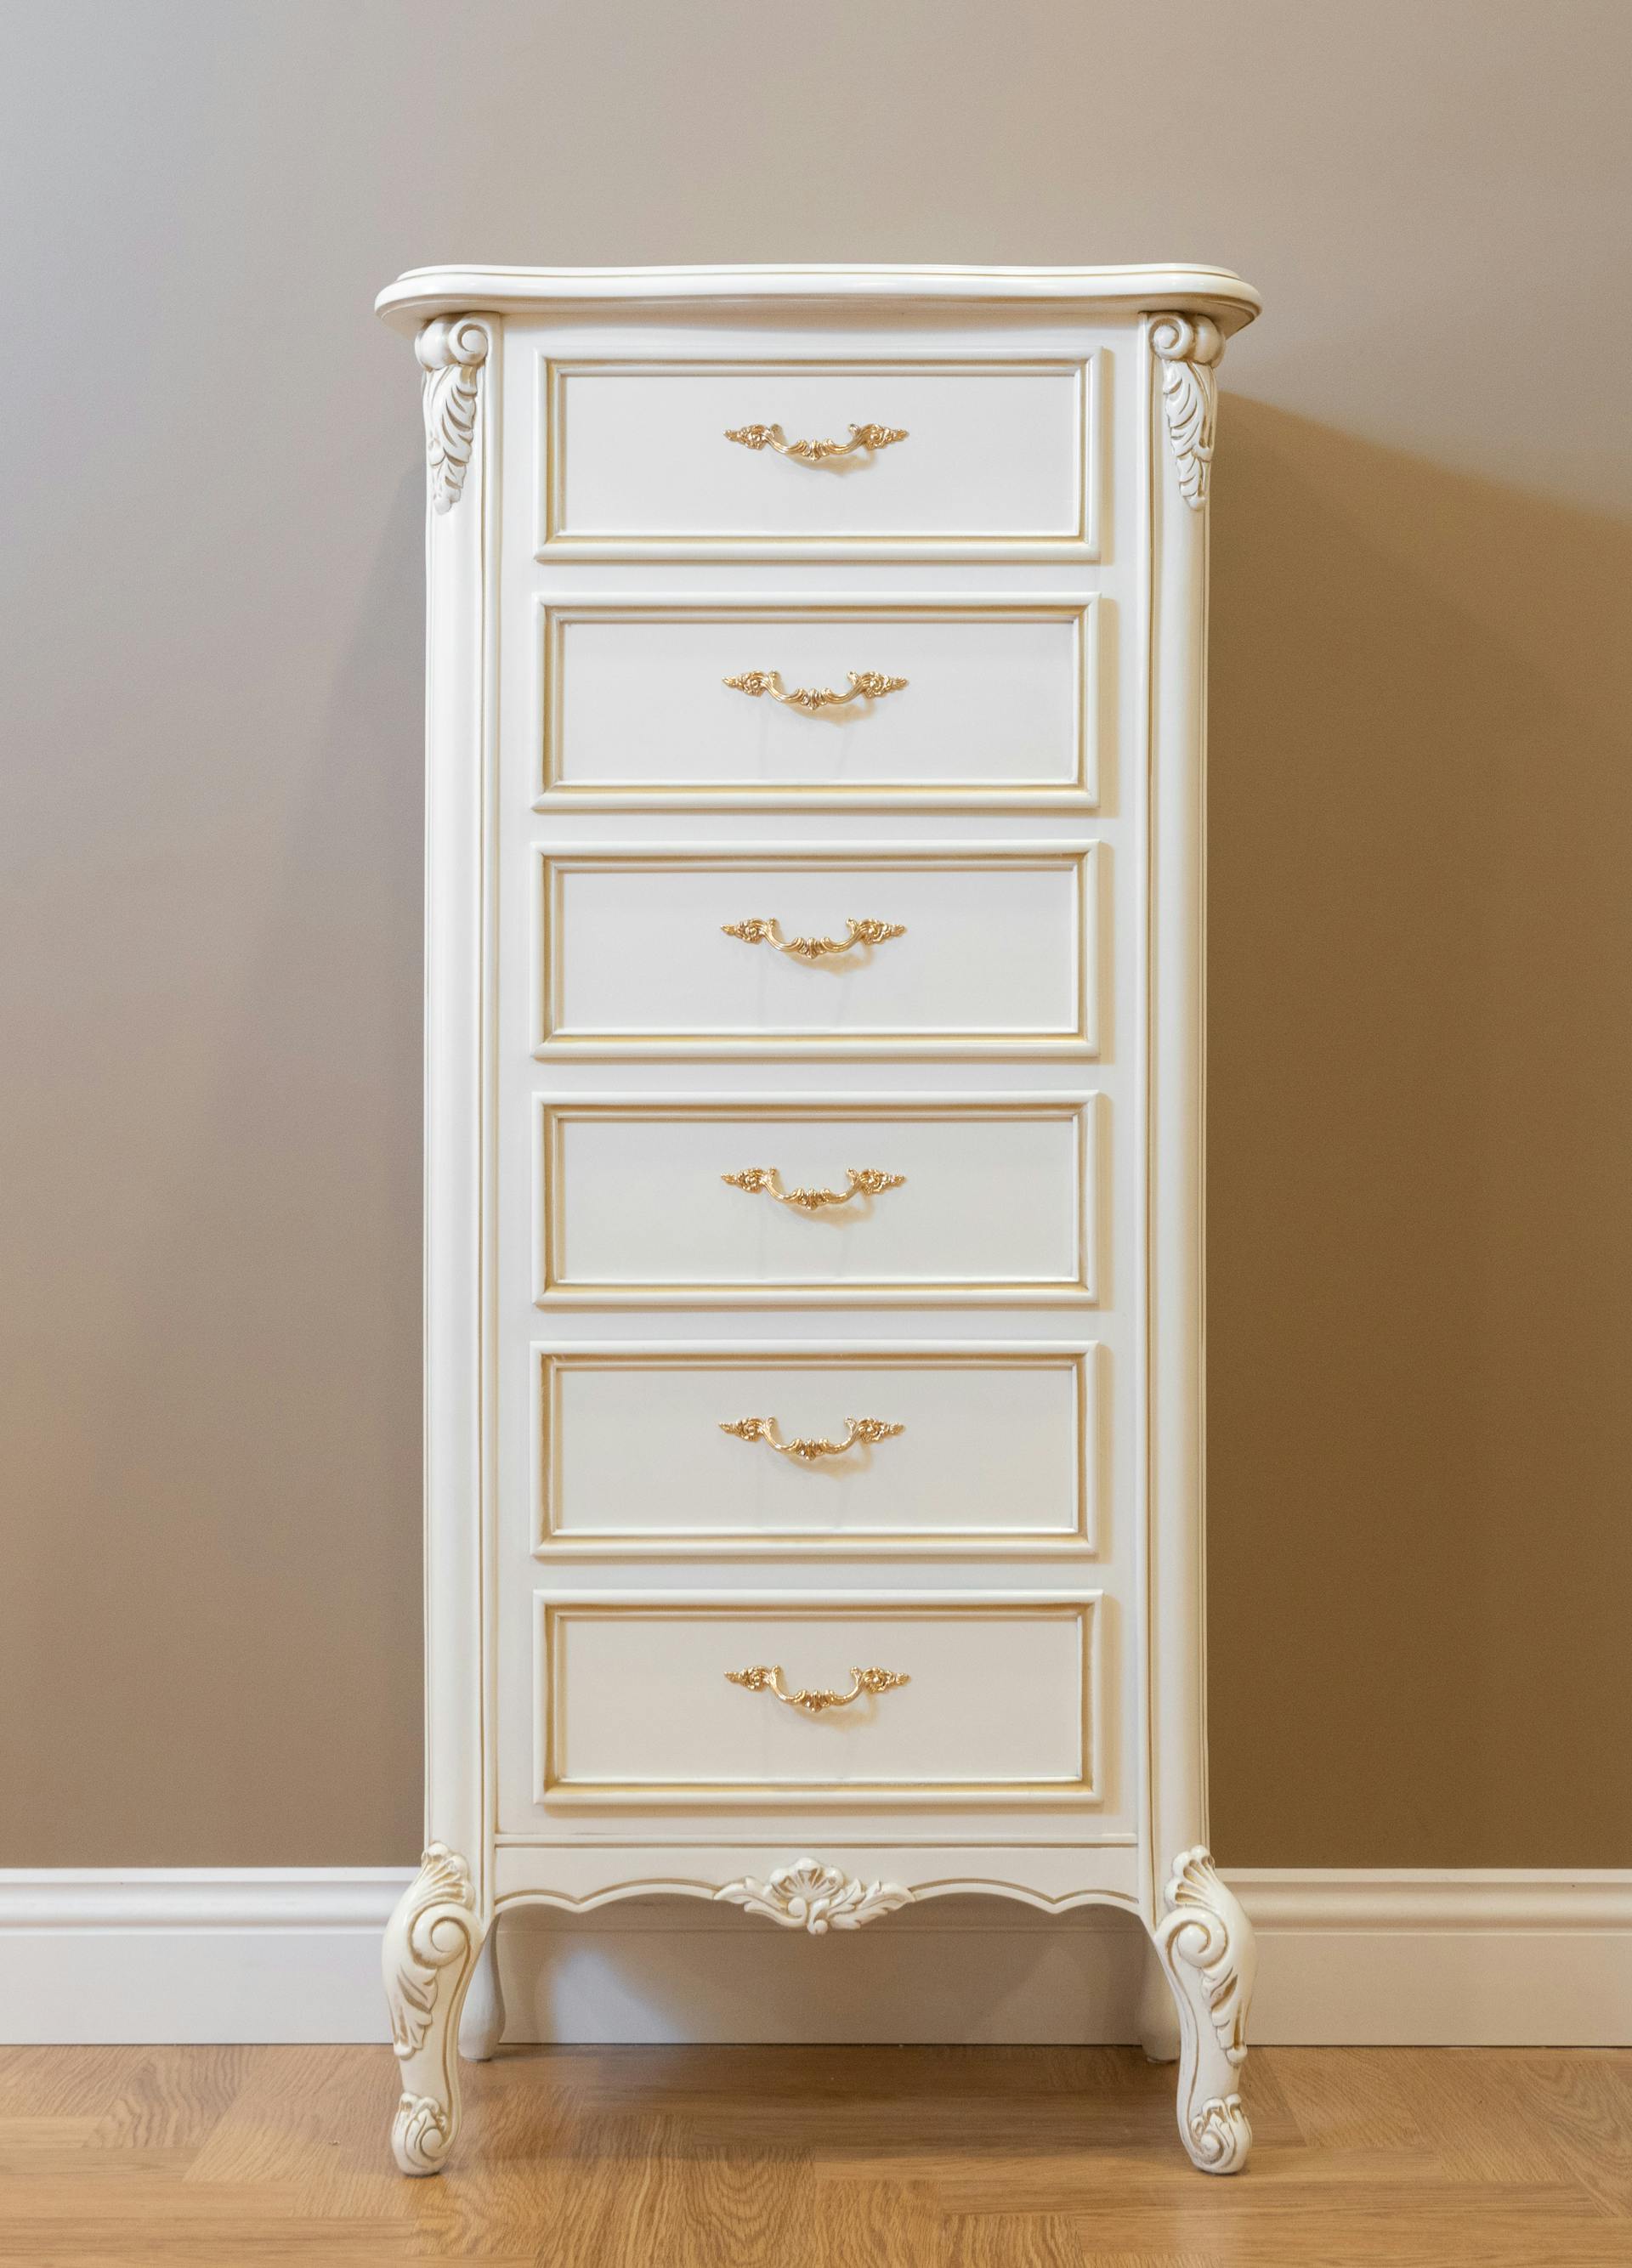 A white vintage chest of drawers | Source: Pexels